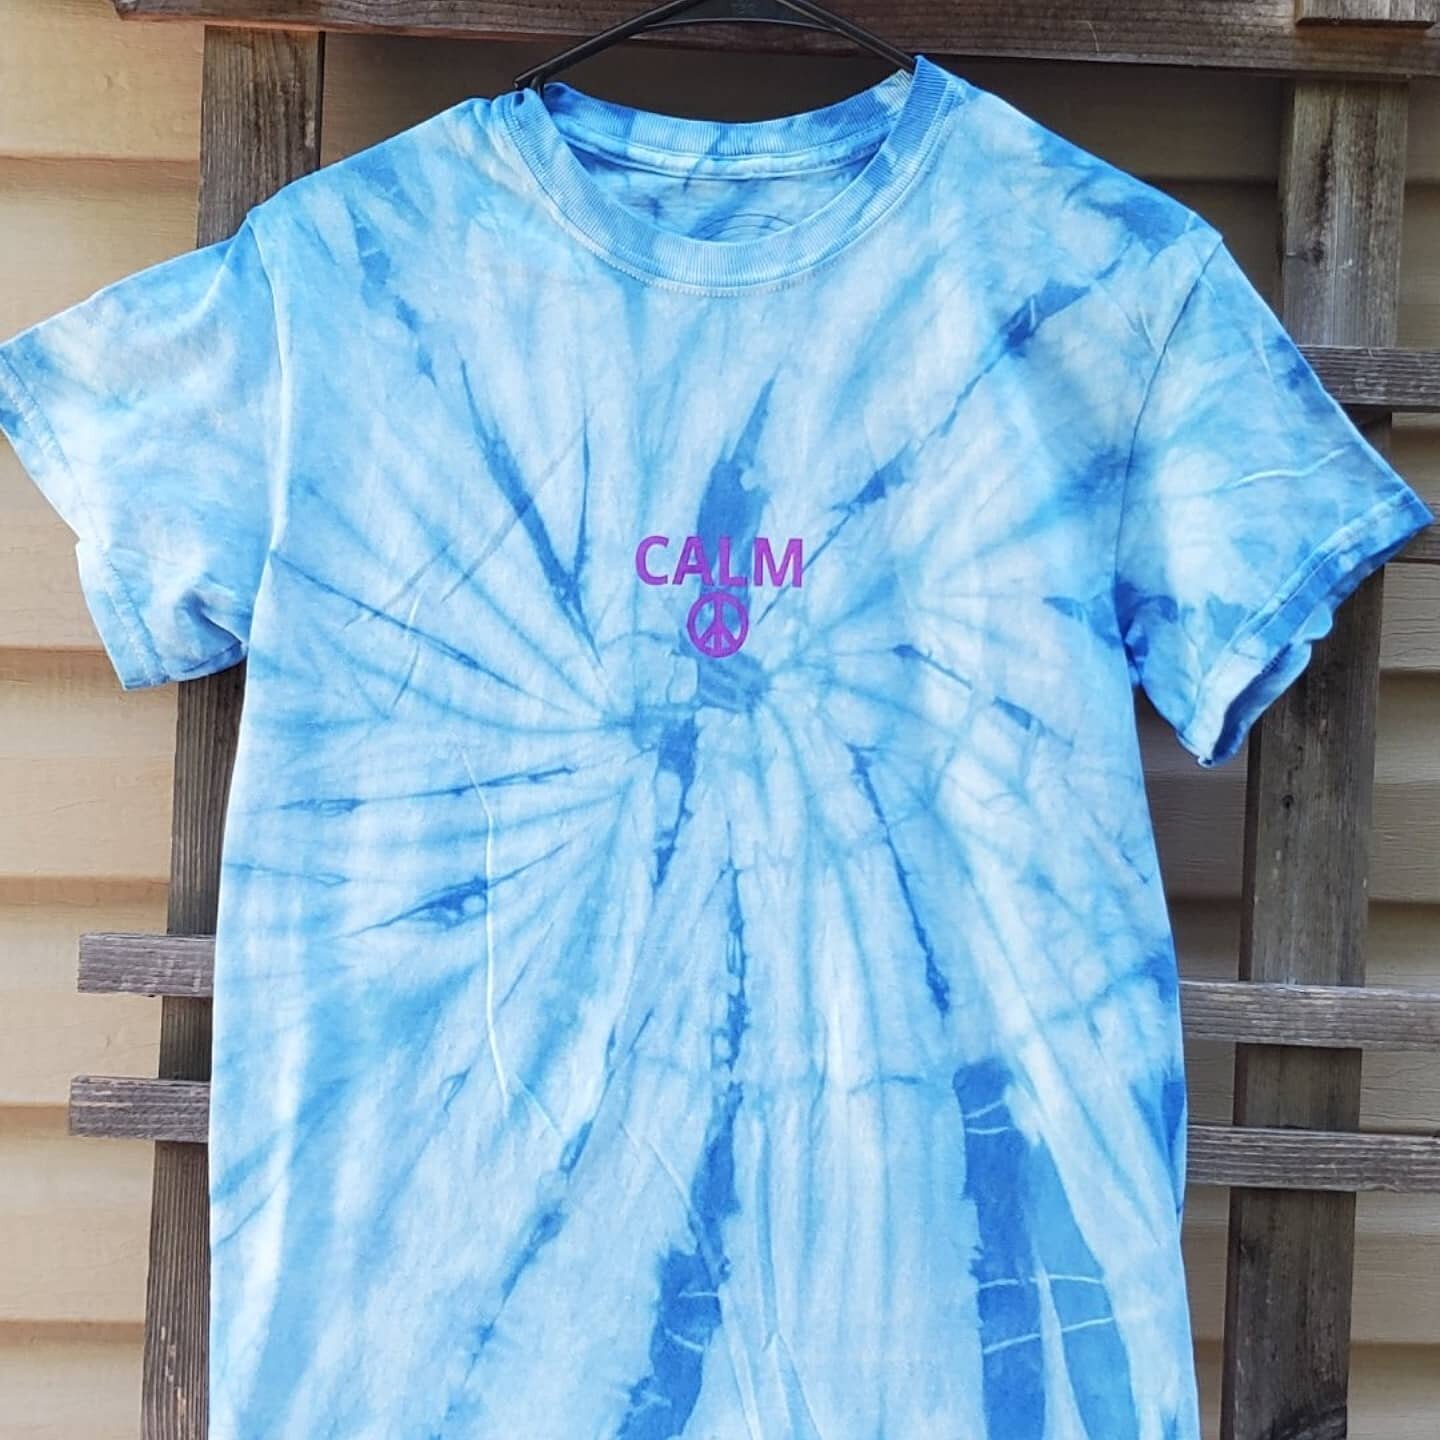 Keep cool stay calm in the NEW Calm Tie-Dye t shirt☮ Free shipping on orders $40+ 

#streetwear #promo #shopsmall #virgina #ccc #summerfit #summer #clothing #clothingbrand #fxbg #tiedye  #tshirt #like4like #instagood #drip #smallbusiness #photoofthed